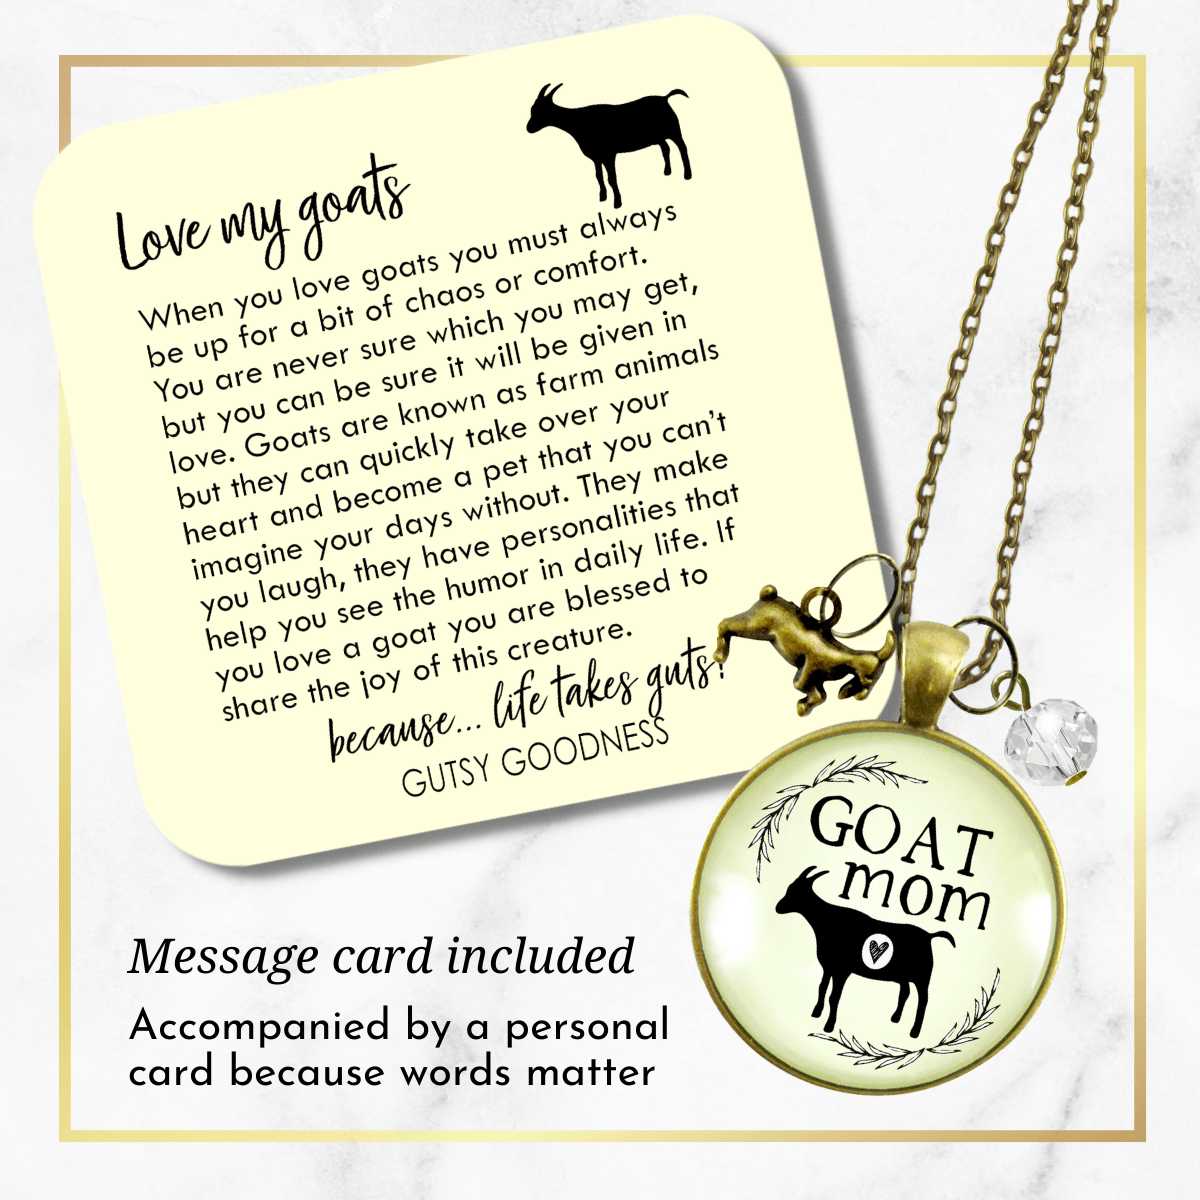 Goat Mom Necklace Baby Farm Animal Jewelry for Mama Charm Gift - Gutsy Goodness